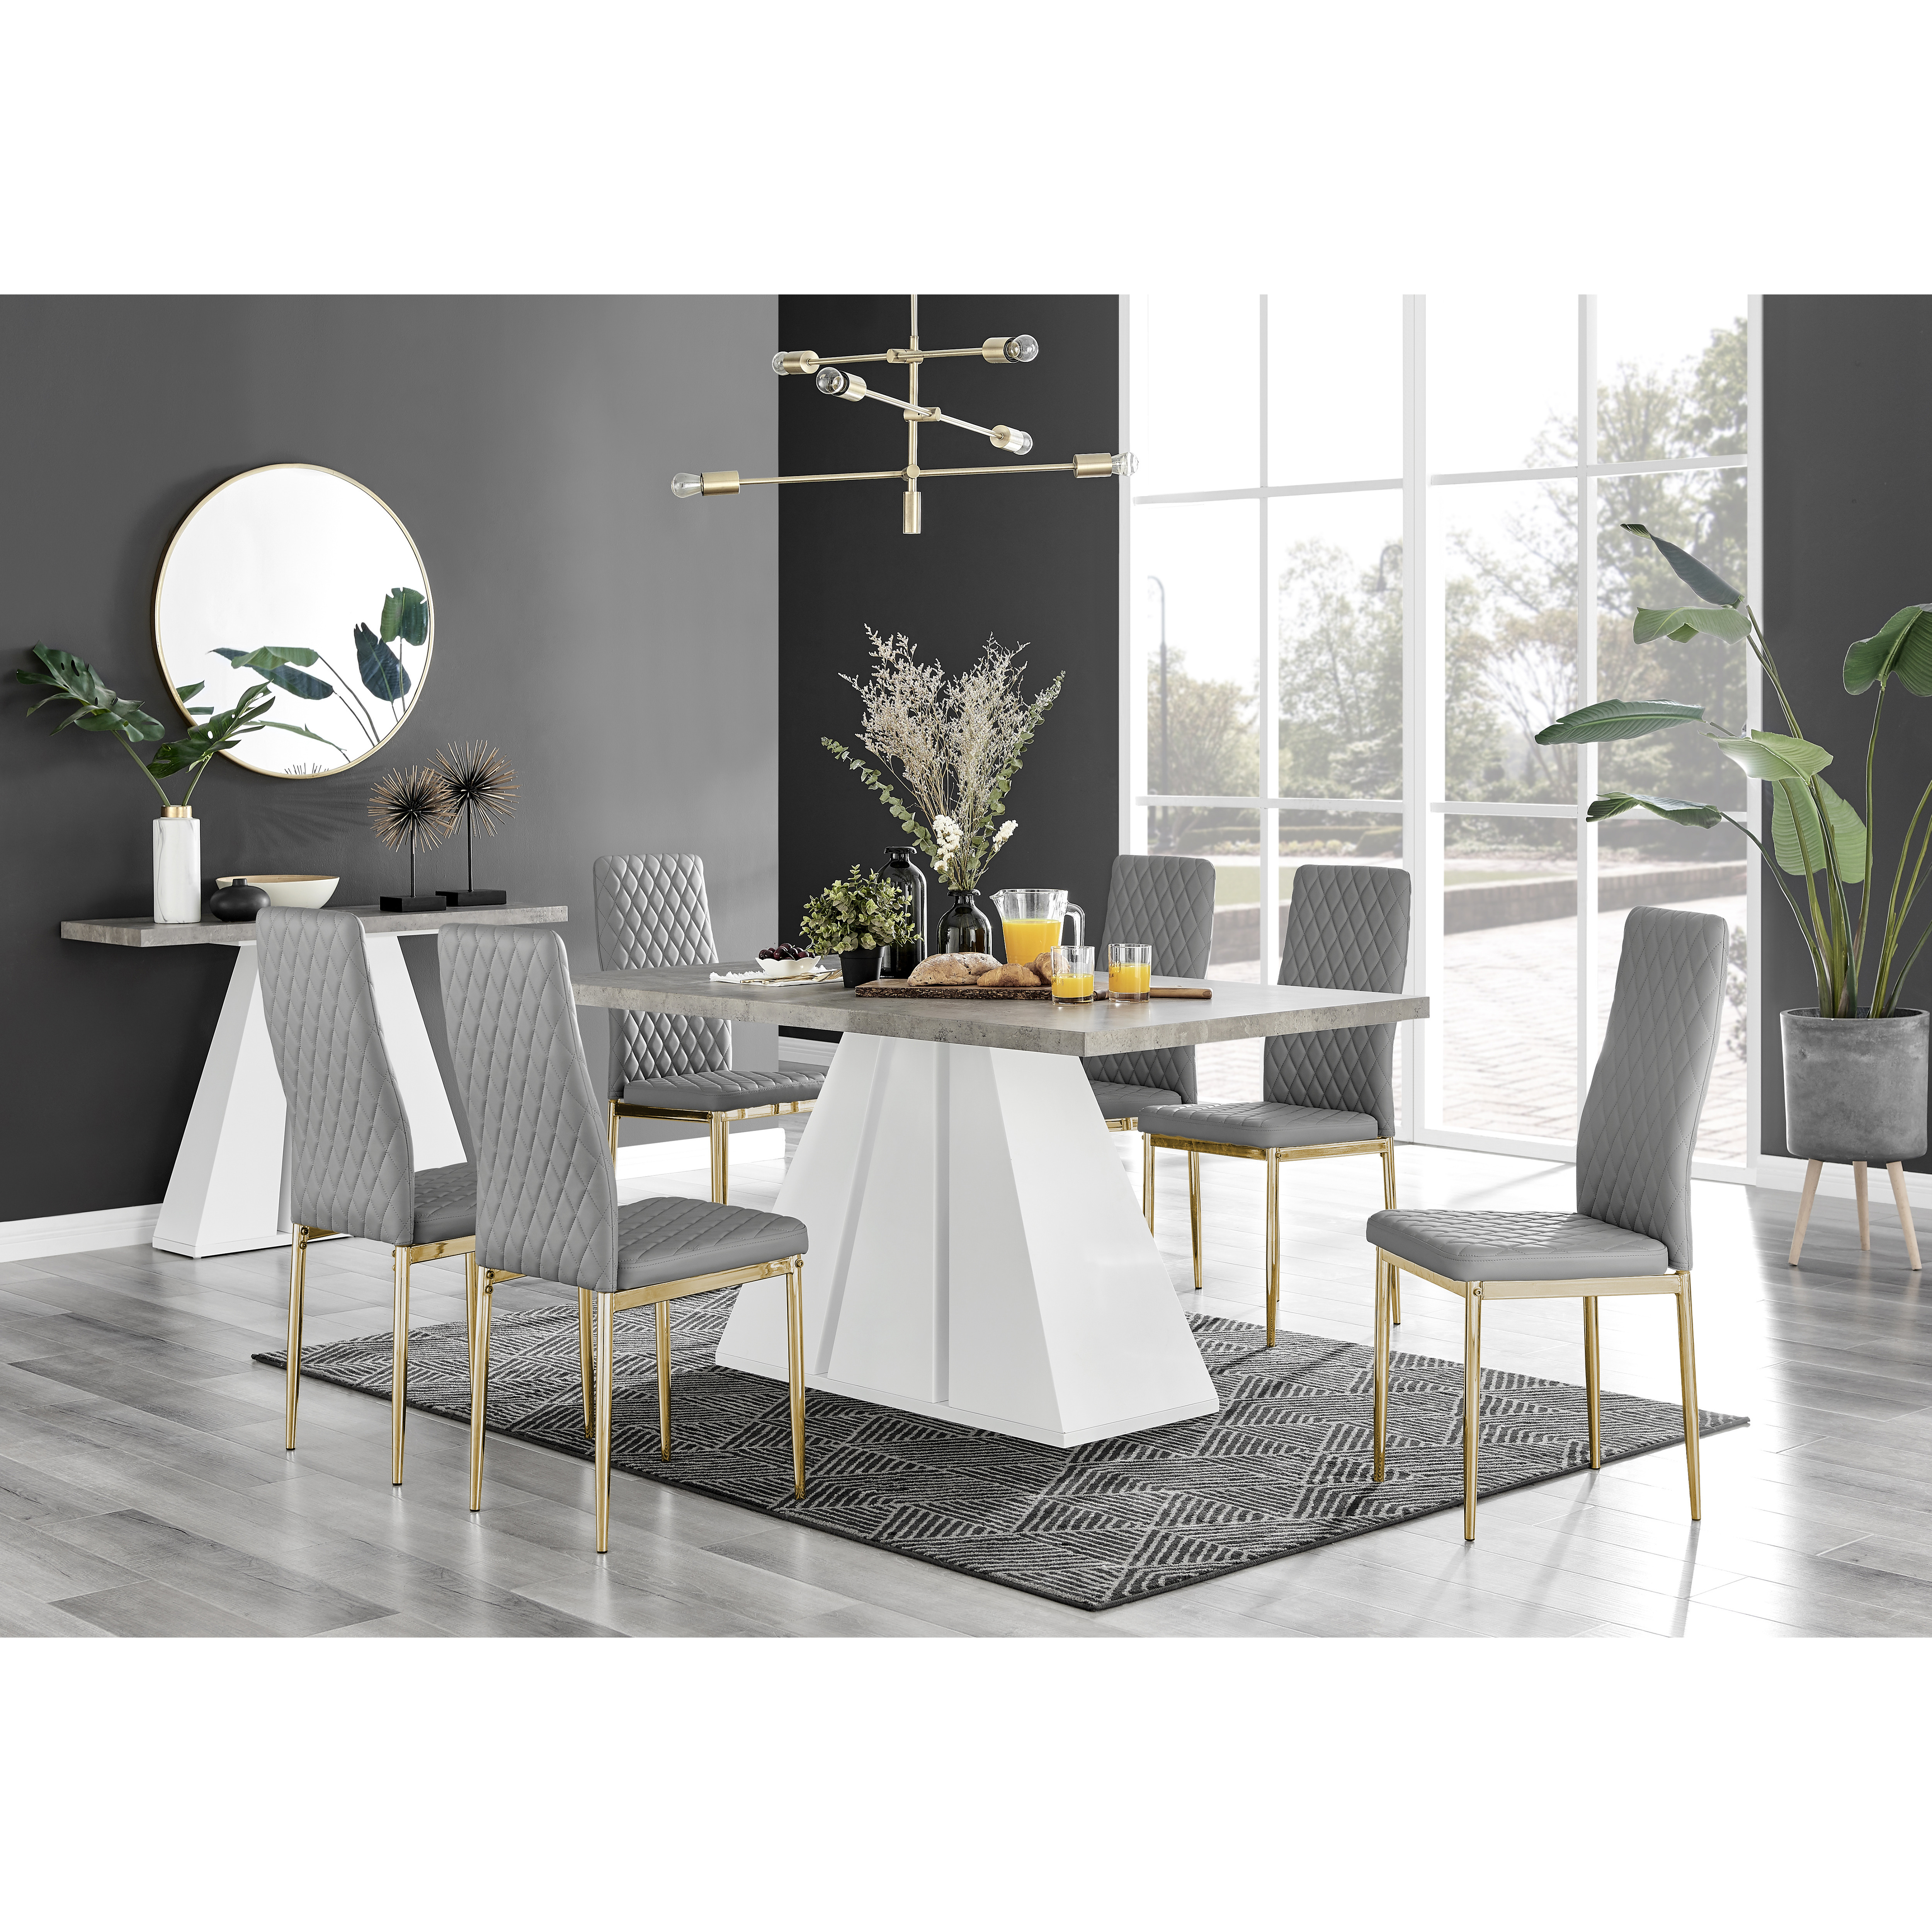 Athens Grey Concrete Effect Dining Table & 6 Milan Gold Leg Chairs